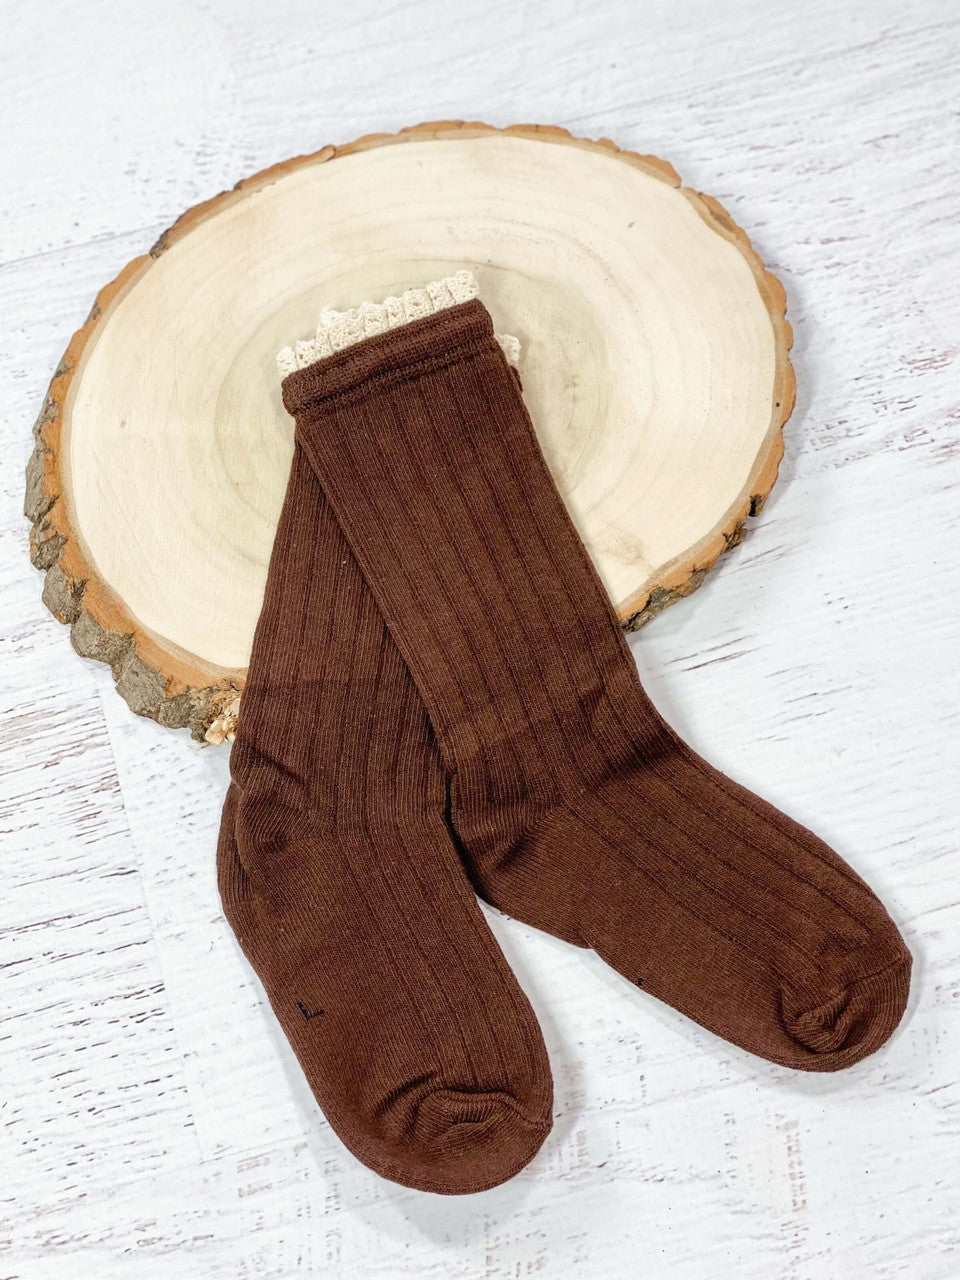 Lace trimmed socks in chocolate